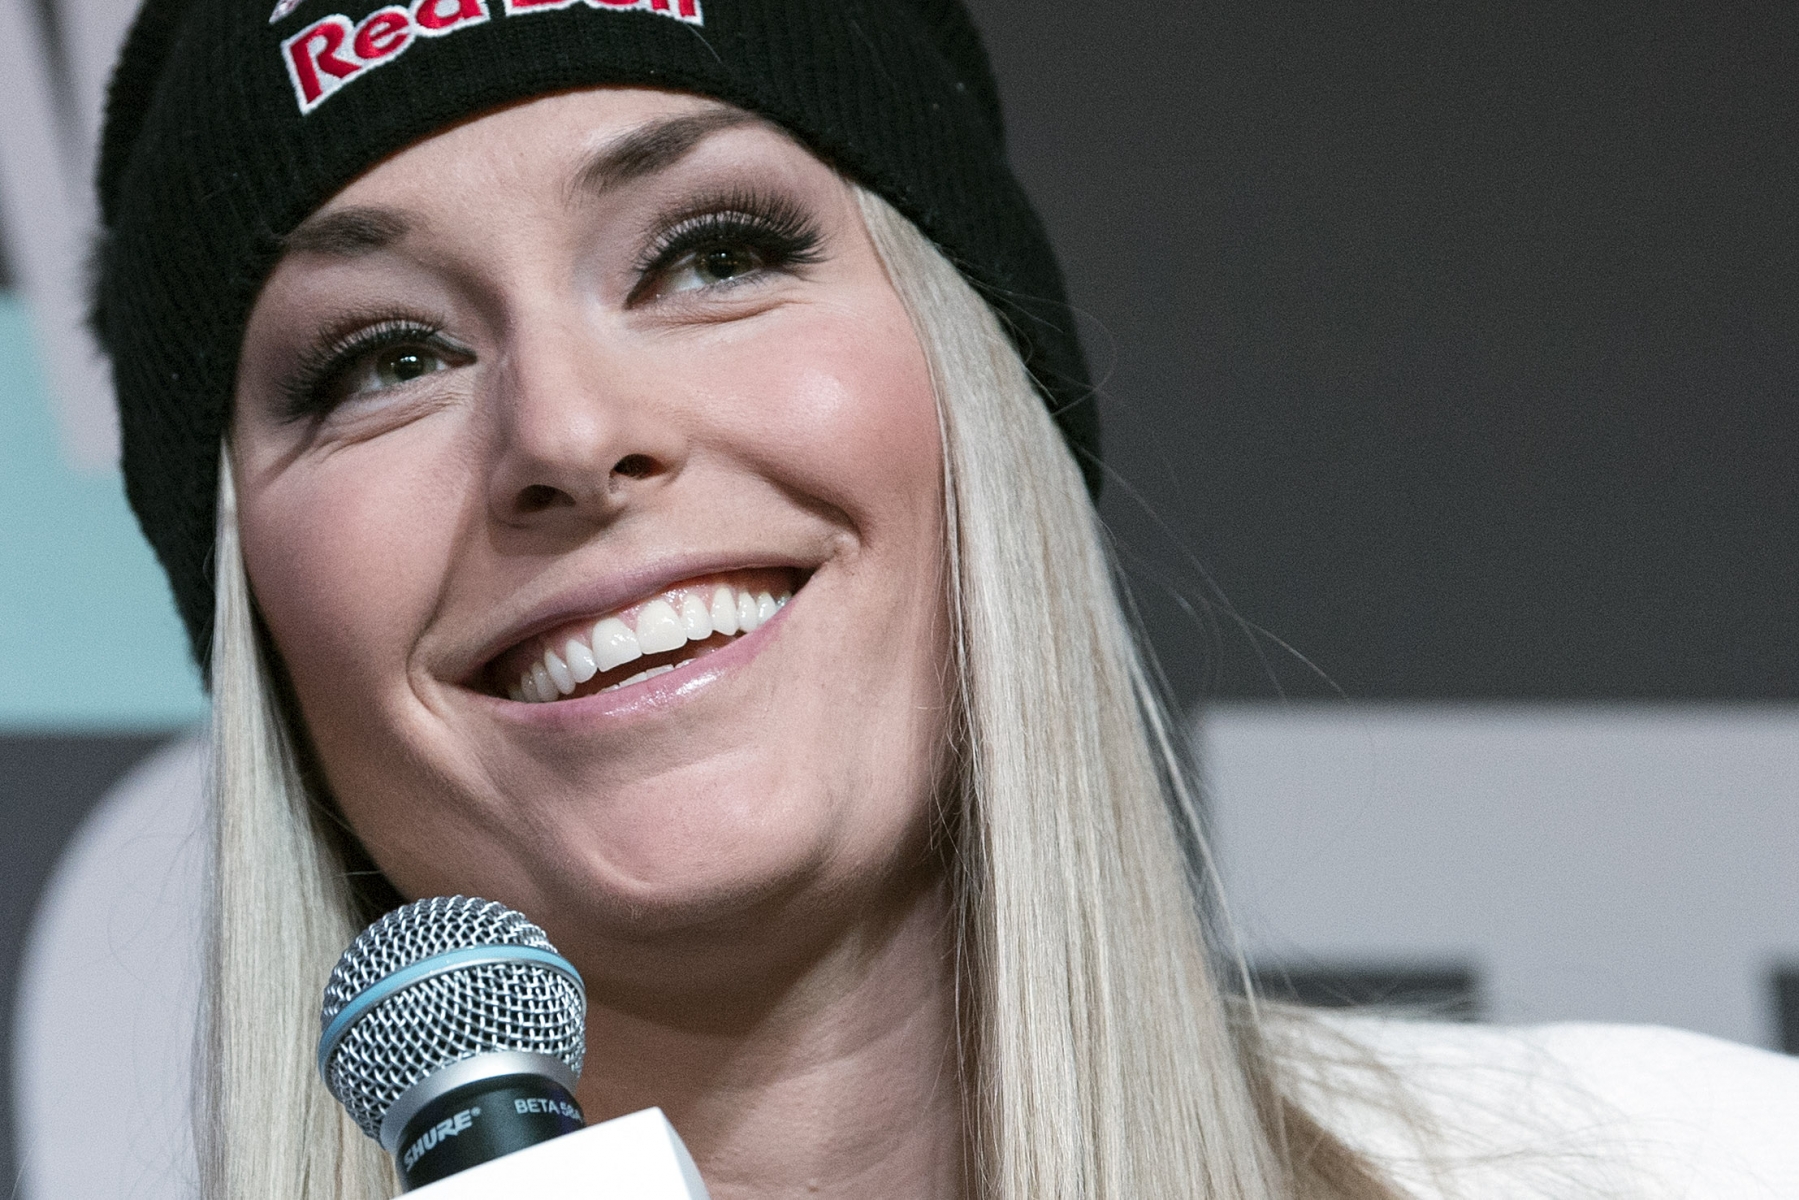 Lindsey Vonn of the United States speaks during a press conference at the 2017 FIS Alpine Skiing World Championships in St. Moritz, Switzerland, on Sunday, February 05, 2017. (KEYSTONE/Peter Schneider) SKI ALPIN WM 2017 ST. MORITZ